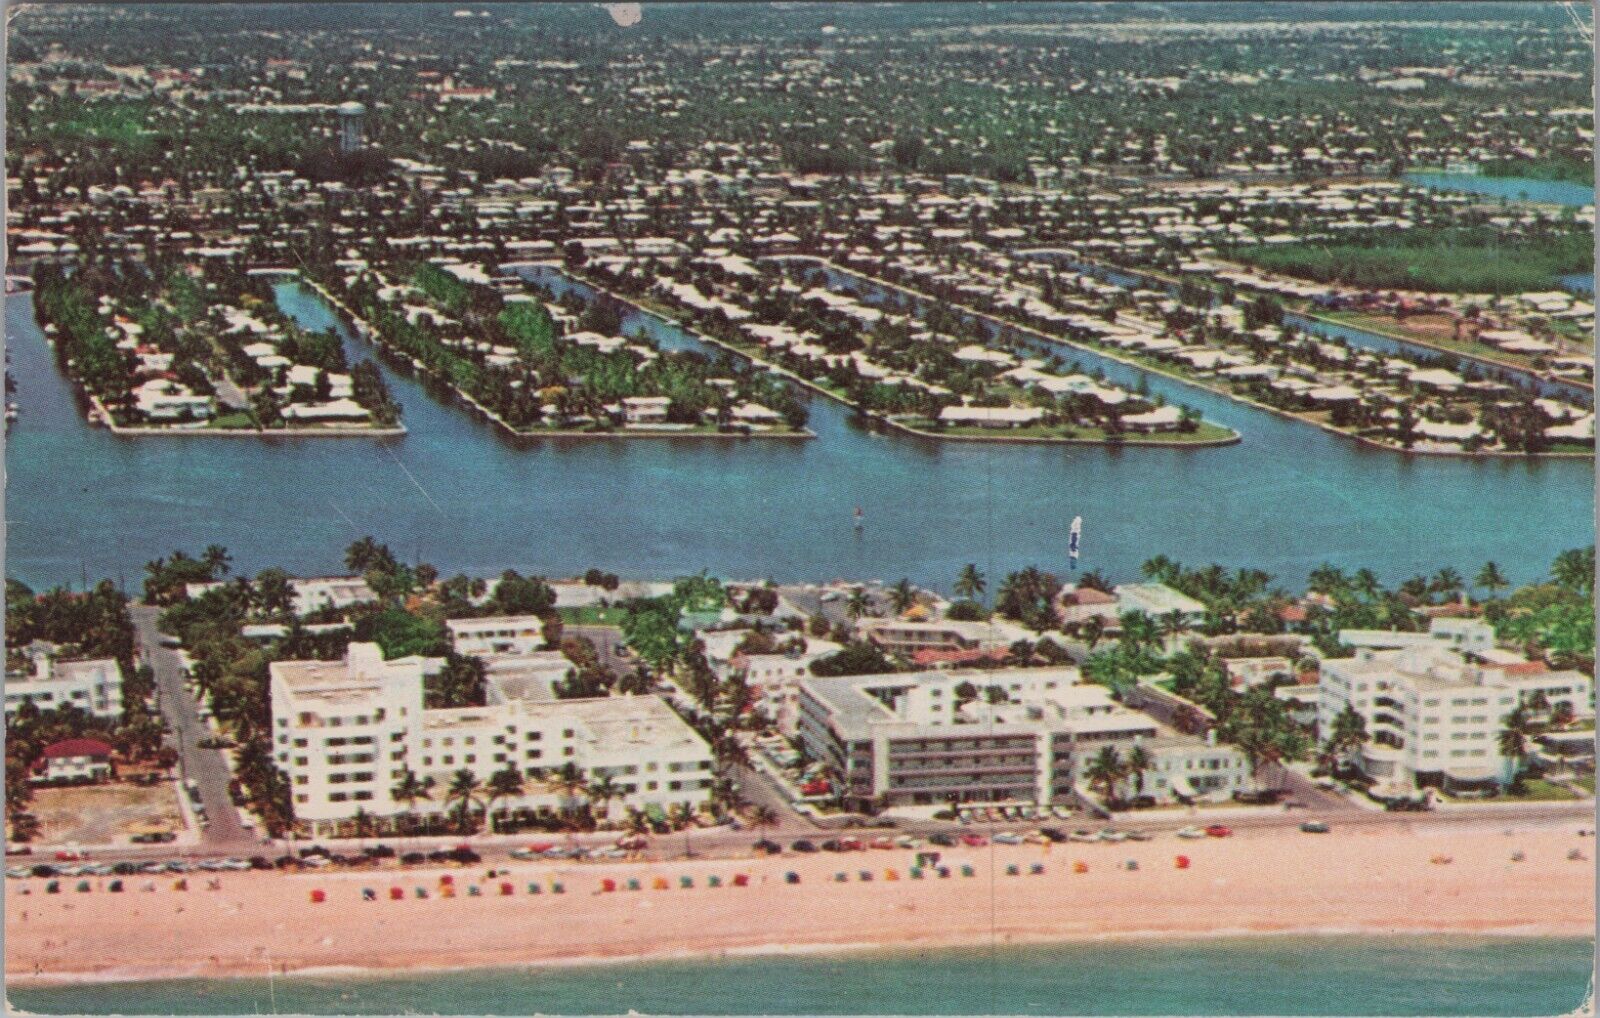 MR ALE ~ Aerial Beach and Hotels Ft. Lauderdale, FL Florida 1957 Postcard 8080.1